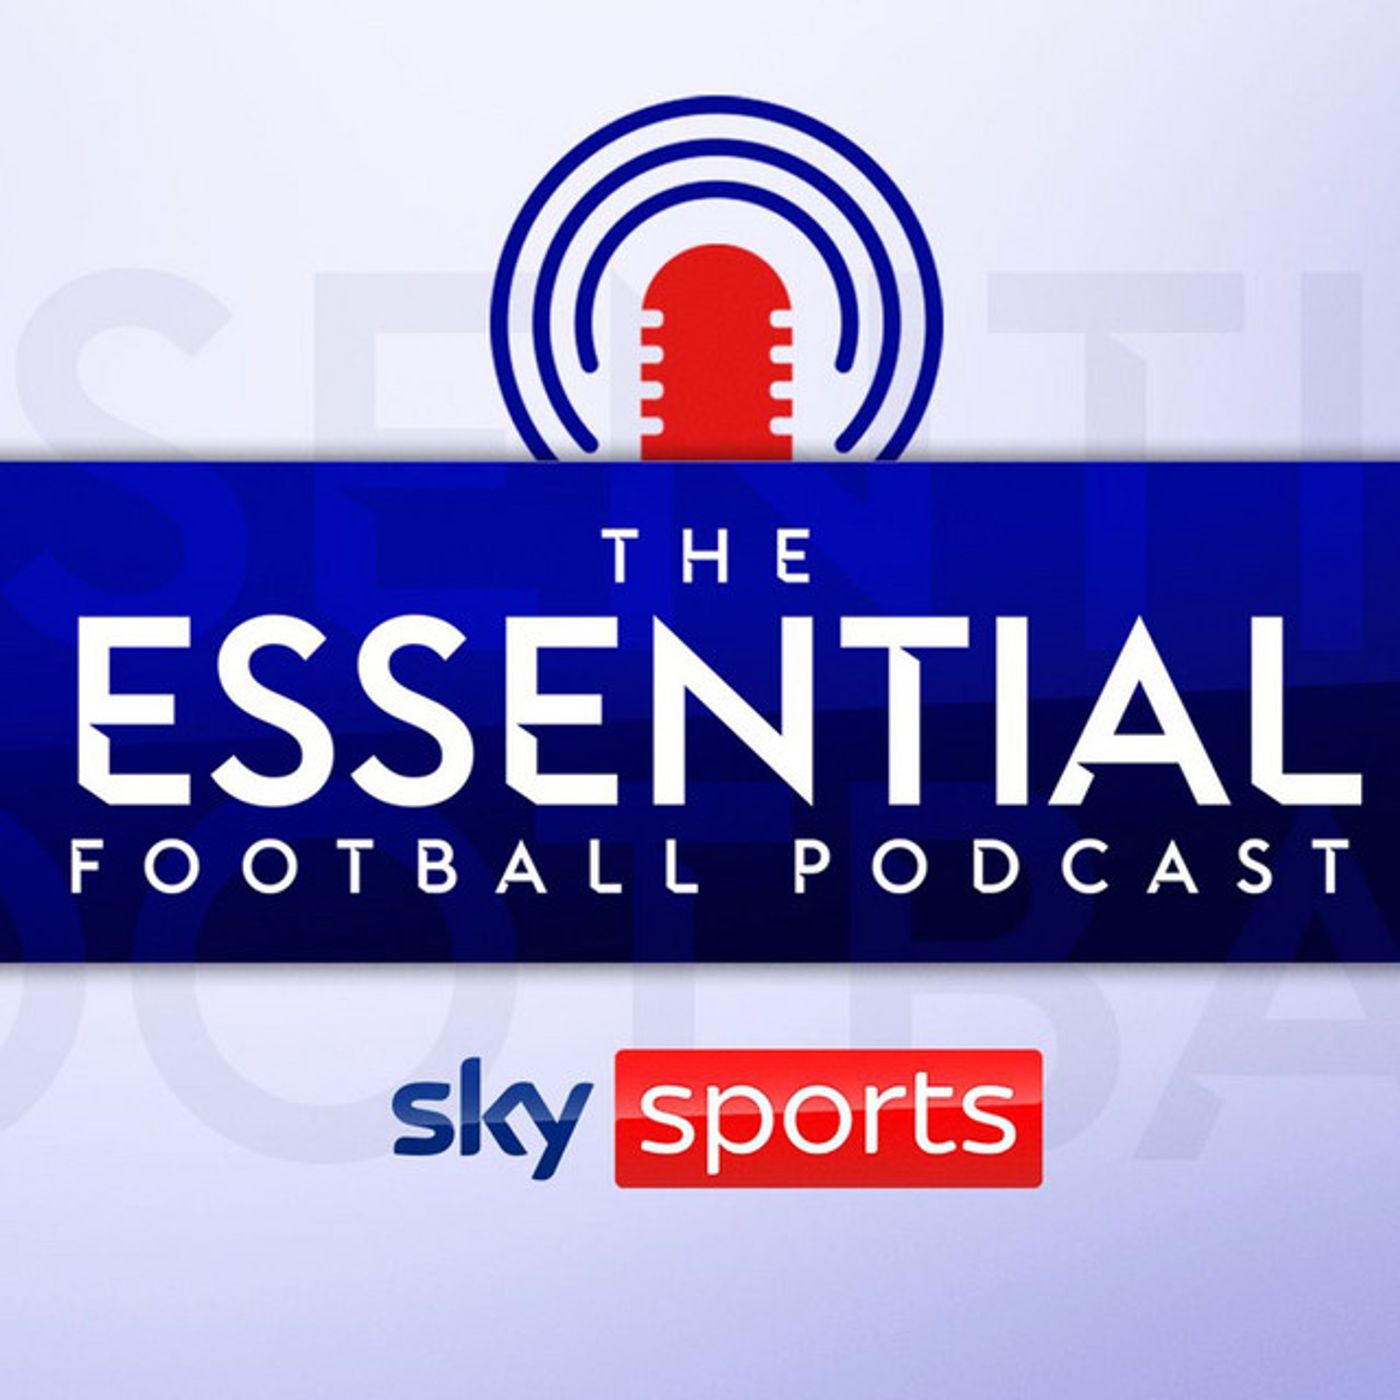 Carabao Cup Final preview with Michael Dawson and Peter Drury